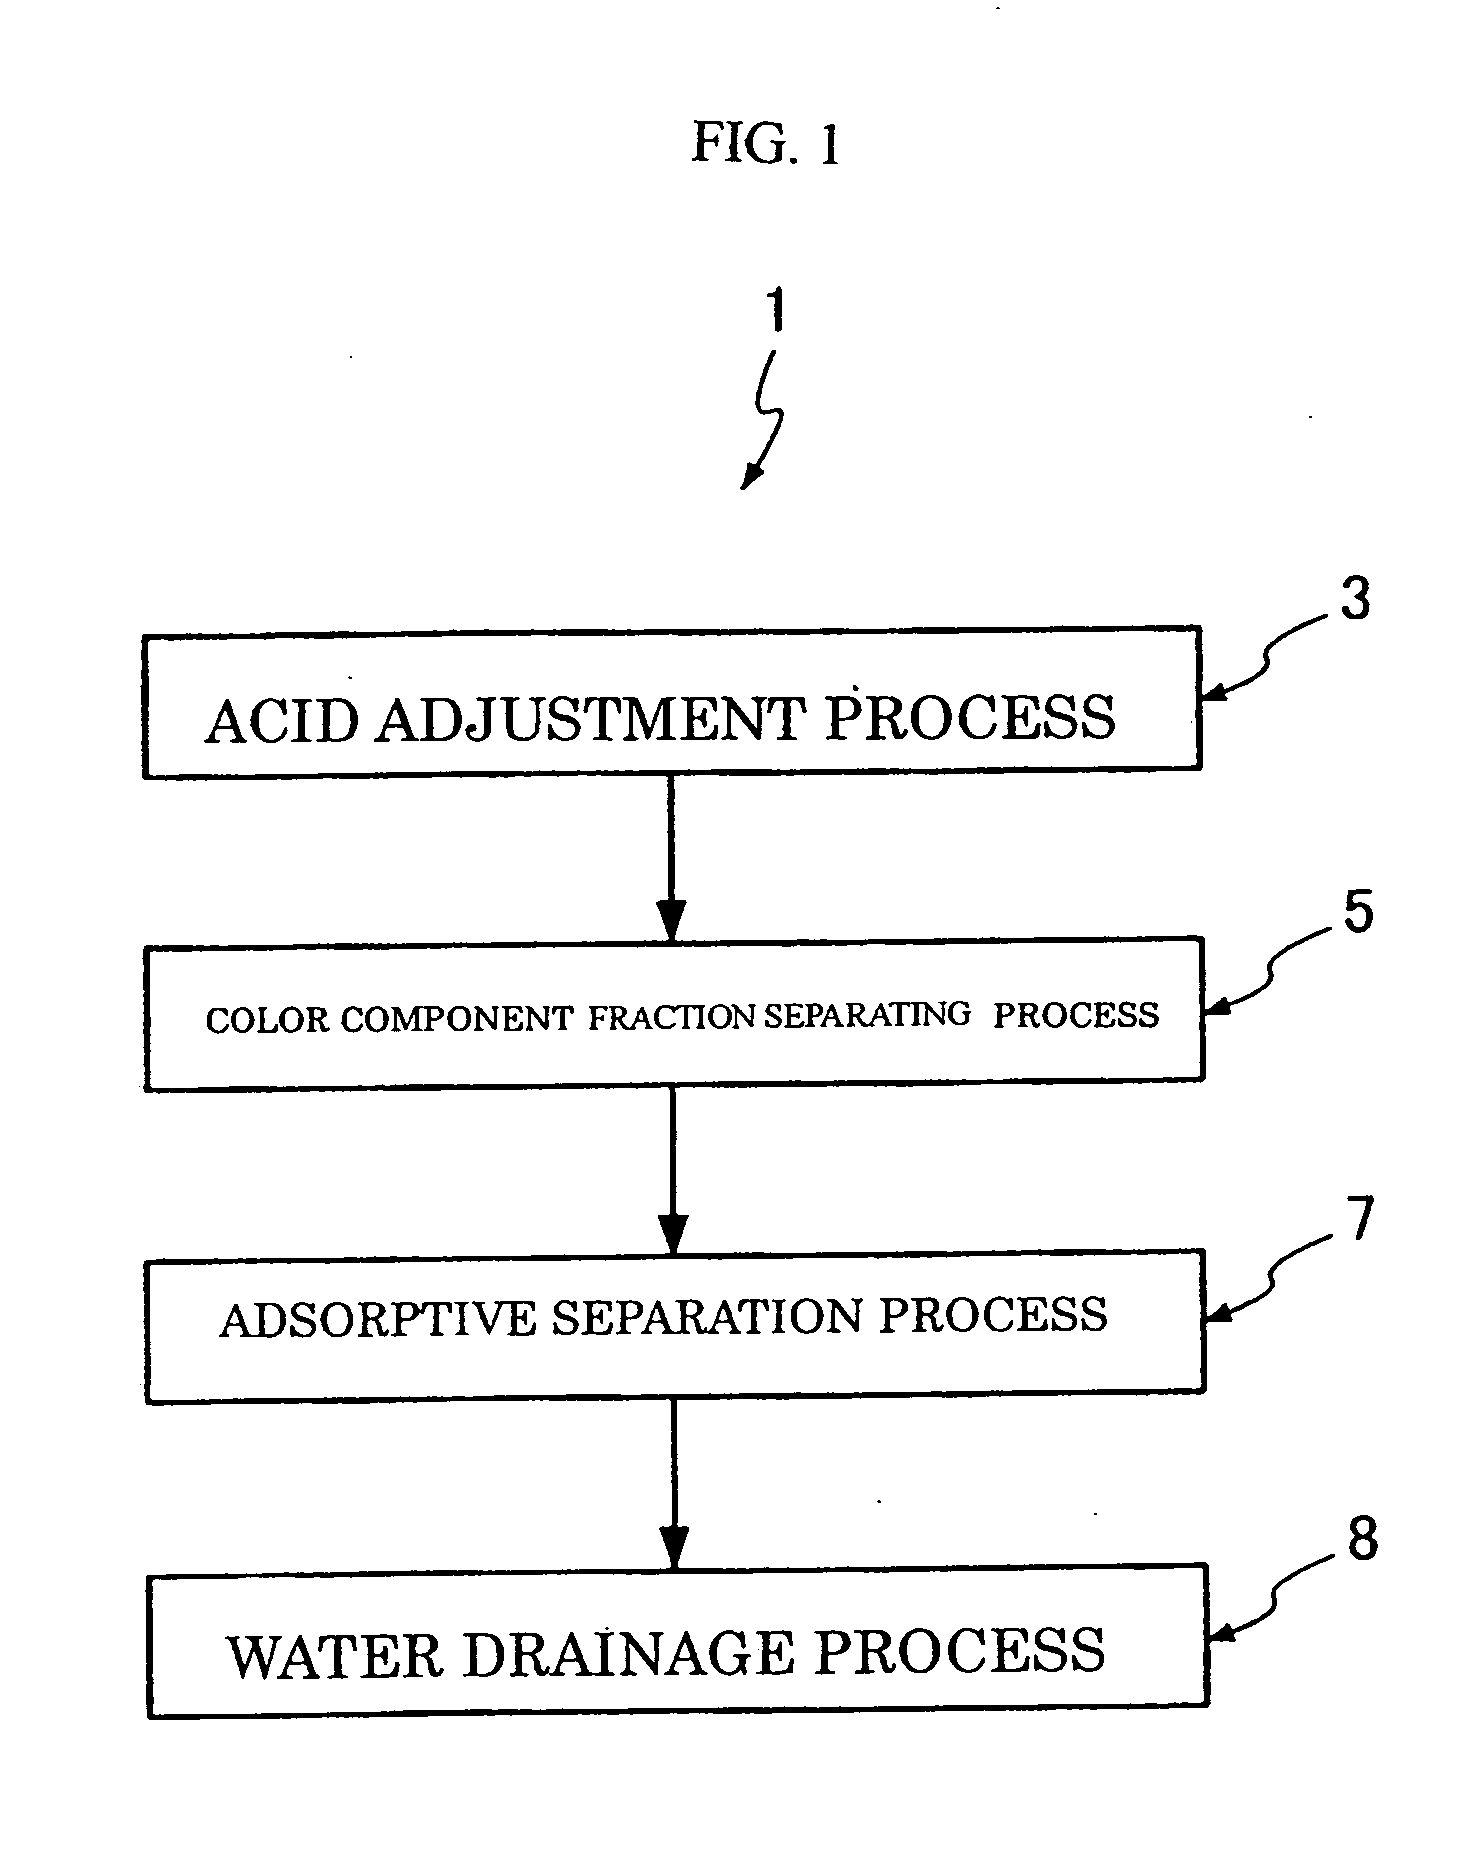 Colored wastewater discoloration method